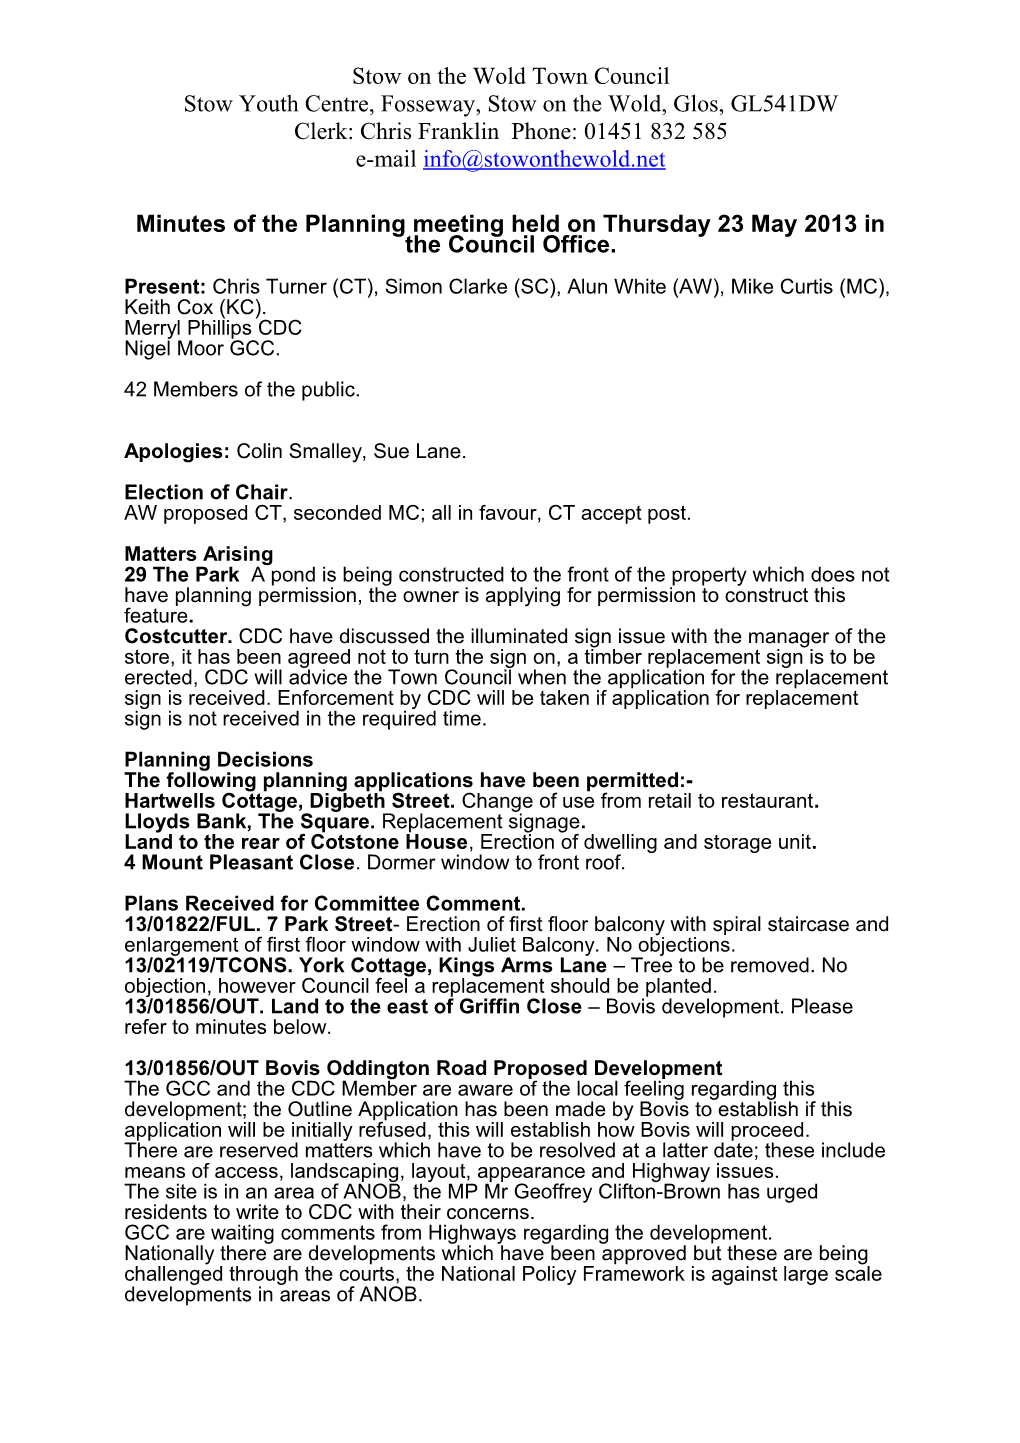 Minutes of the Planning Meeting Held on Wednesday 2 January 2013 in the Council Office